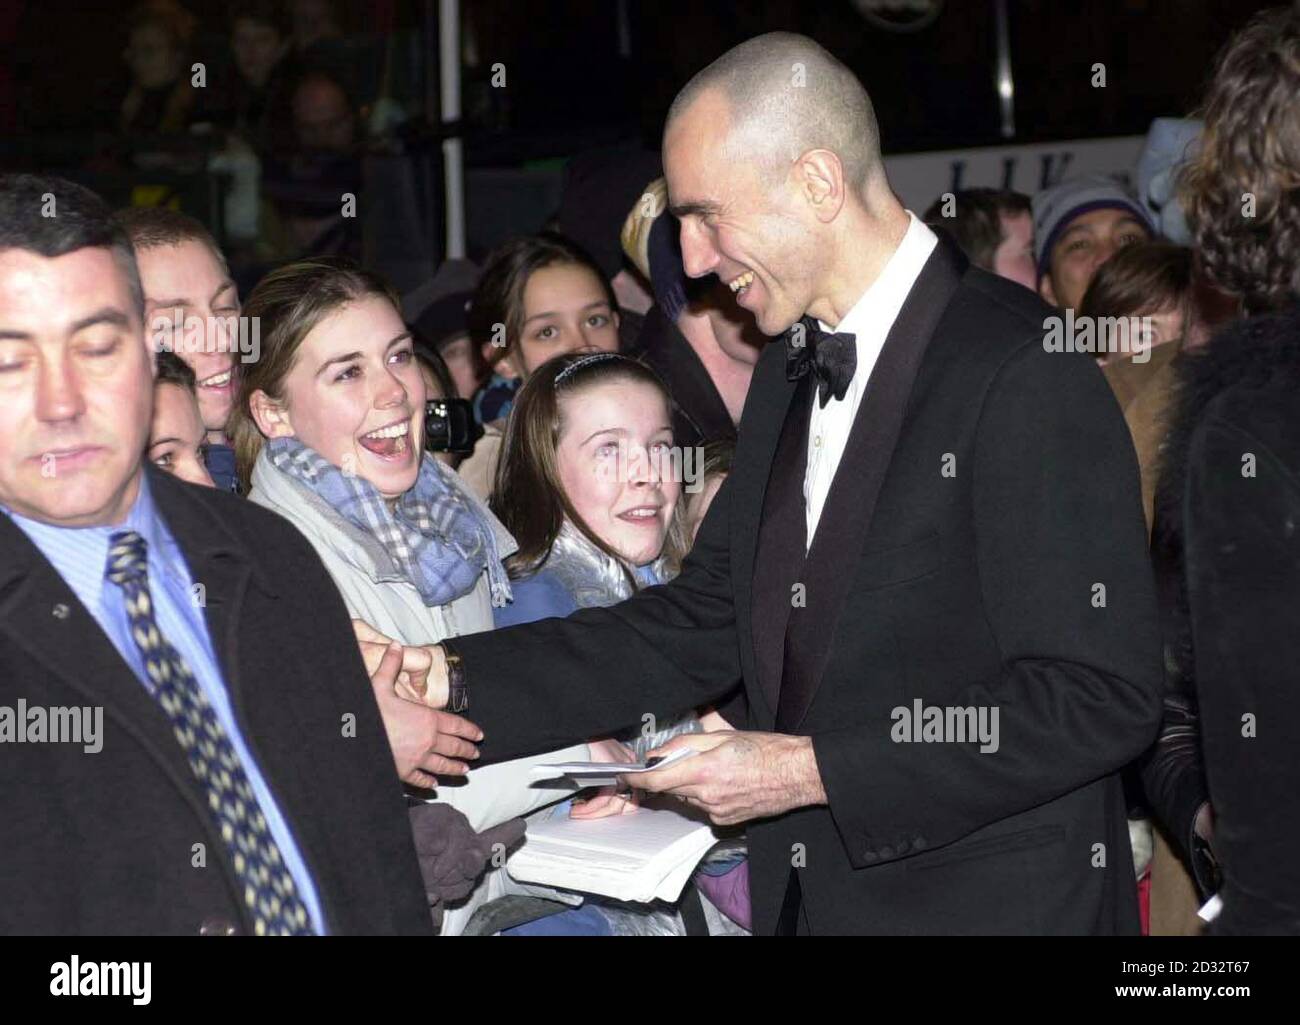 Actor, Daniel Day-Lewis, who plays the supporting lead, arriving at the Irish premiere of director, Martin Scorcese's, Gangs of New York, this evening, at the Savoy Cinema on O'Connell Street, Dublin.  Stock Photo